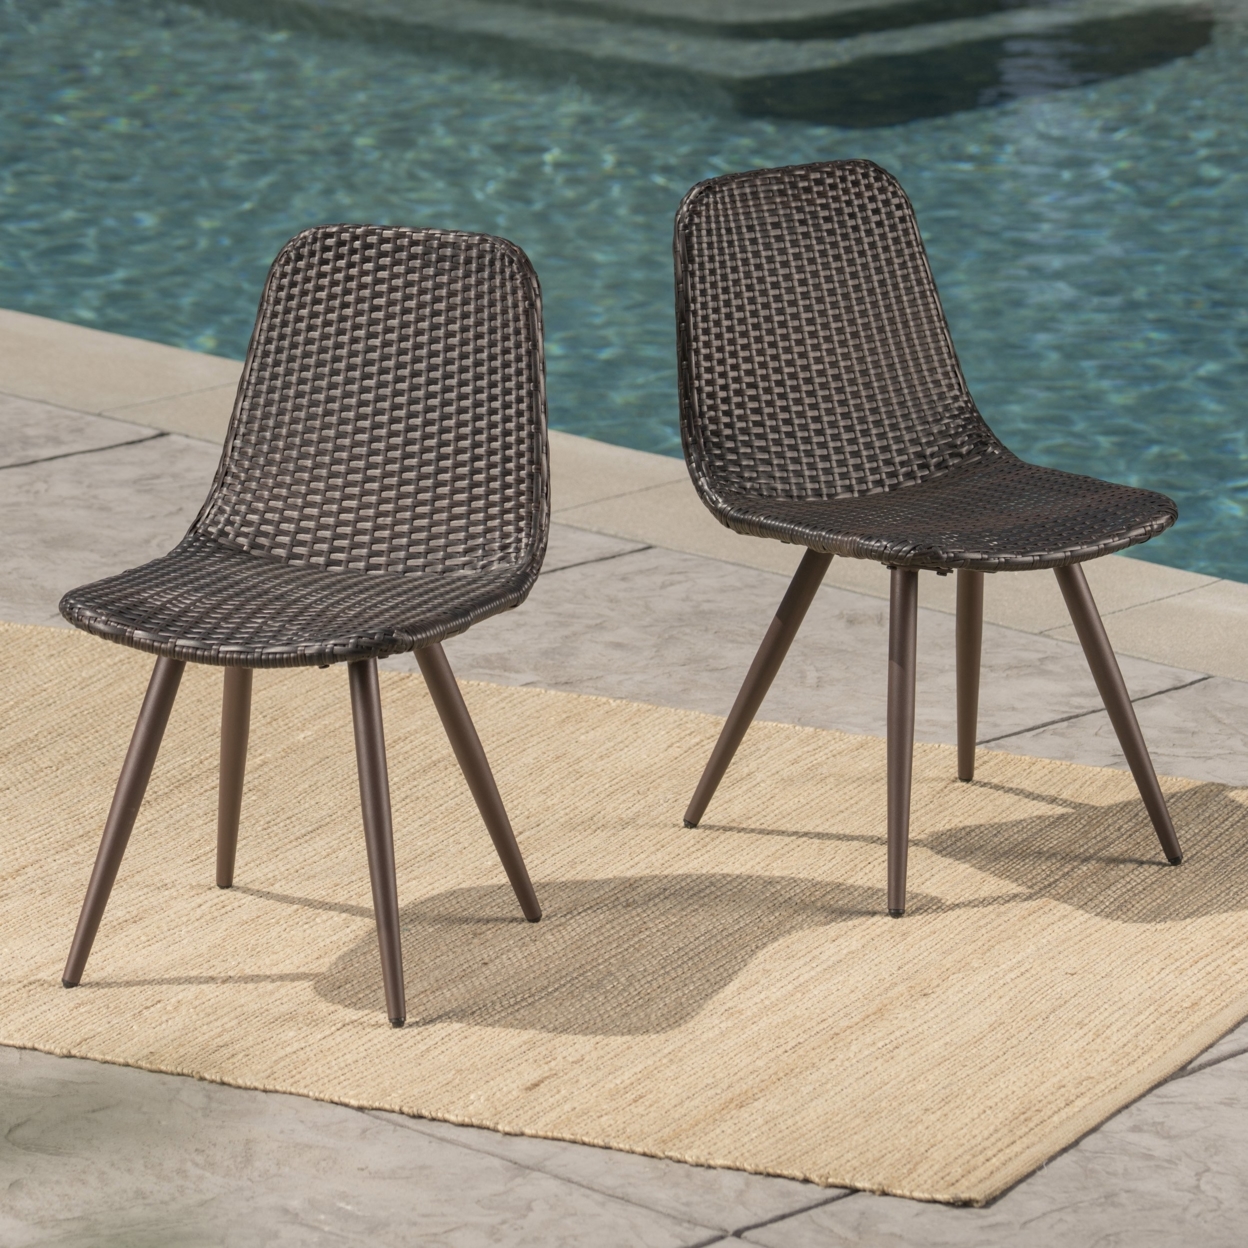 Gilda Outdoor Multibrown Wicker Dining Chairs With Dark Brown Powder Coated Legs - Brown, Set Of 2